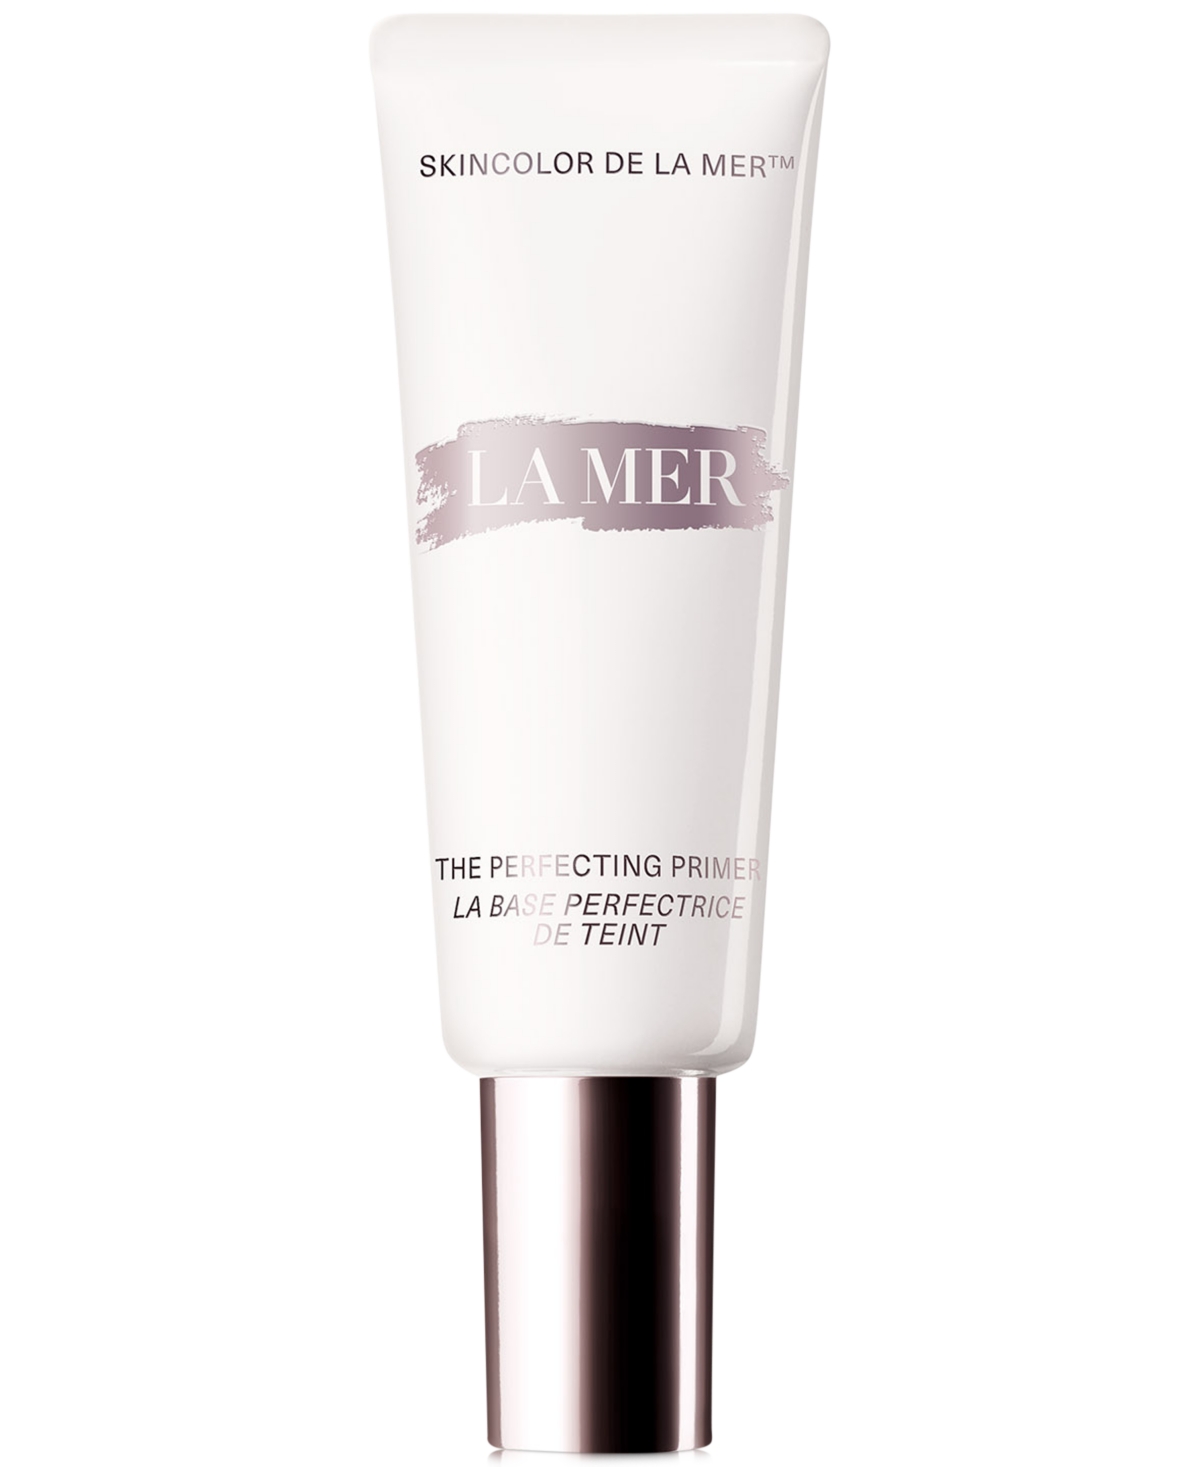 The Perfecting Face Primer, 1.4 oz.